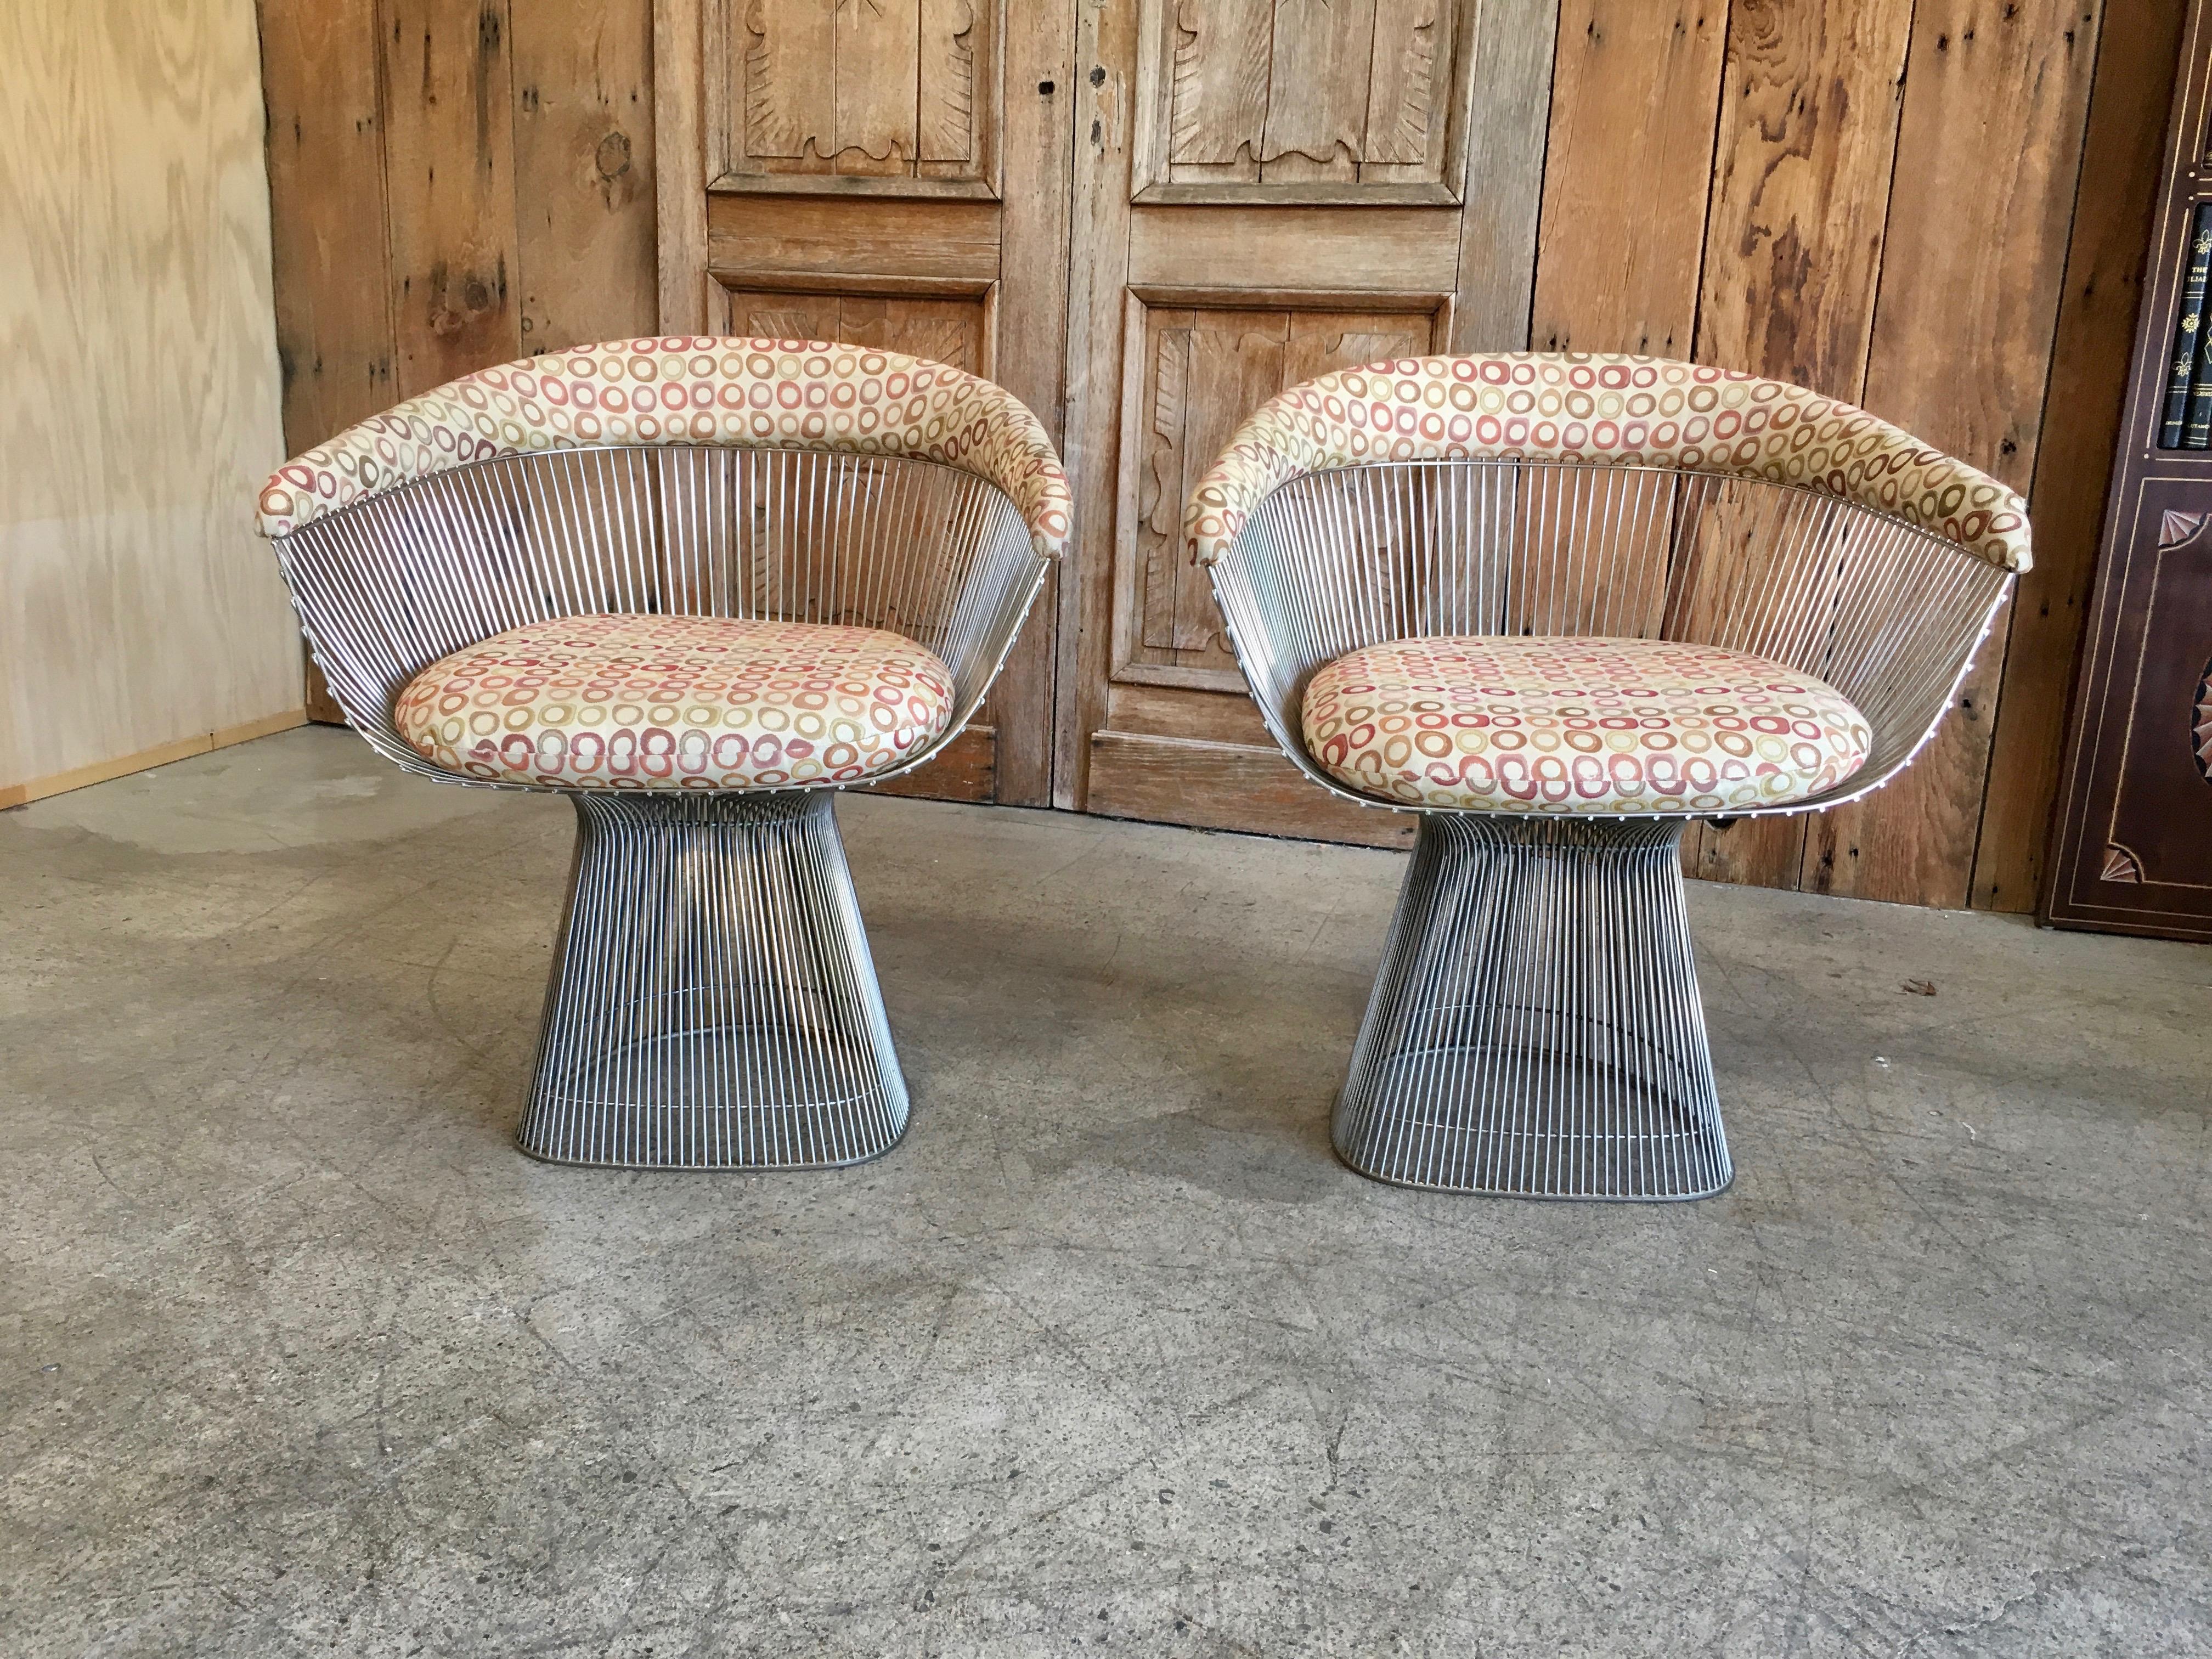 Set of two chrome nickel chairs recently polished new upholstery recommended.